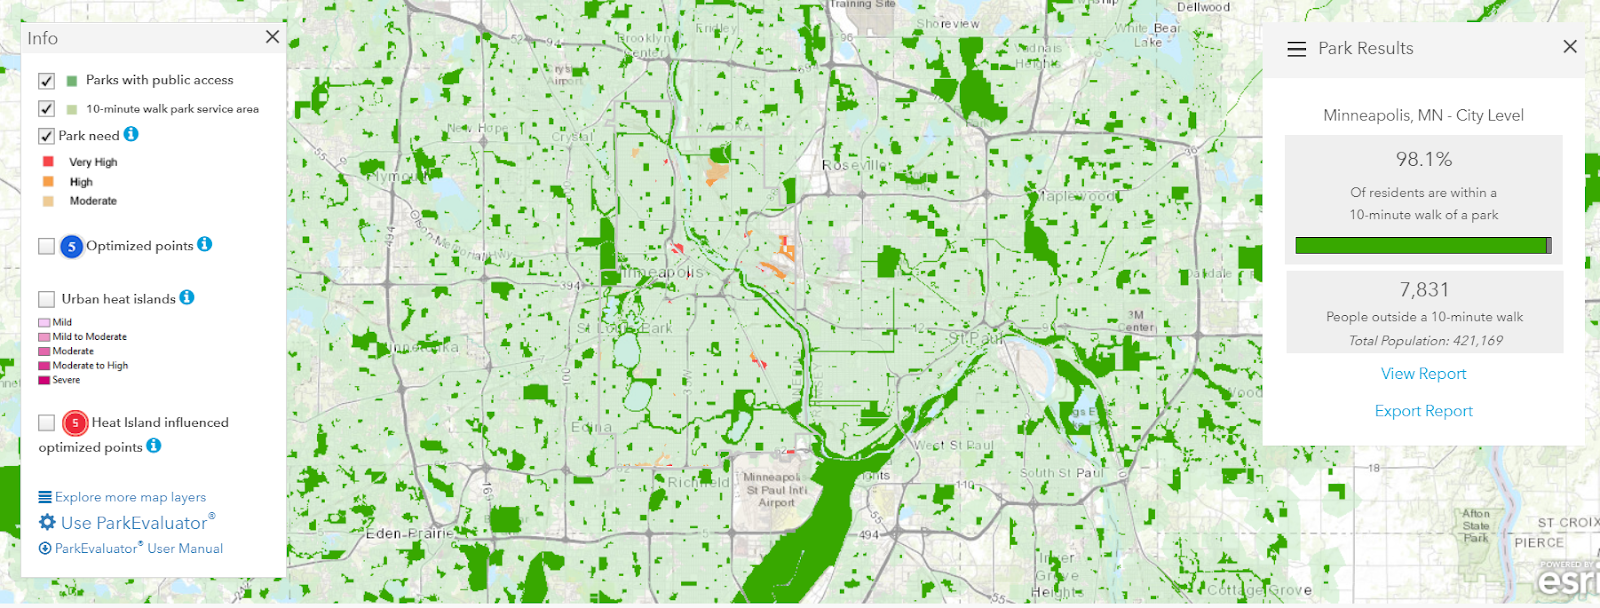 “Park Results” for Minneapolis: 98.1% of residents are within a 10 minute walk of a park. 7,831 people are outside a 10-minute walk of a park, from a total population of 421,169.